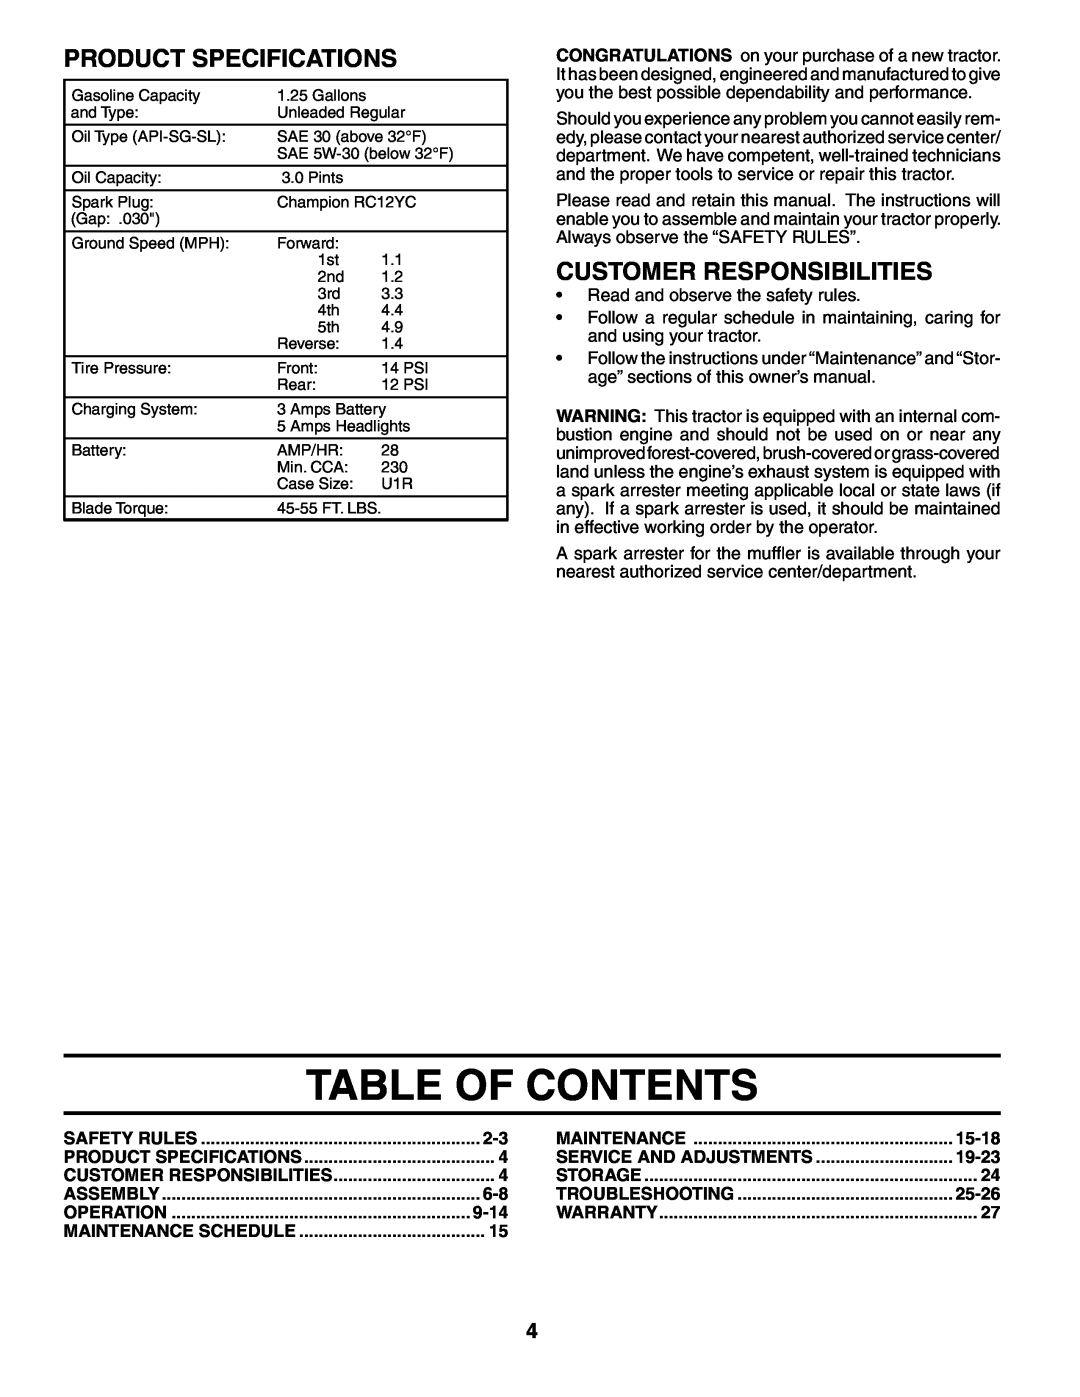 Poulan PD15538LT manual Table Of Contents, Product Specifications, Customer Responsibilities 